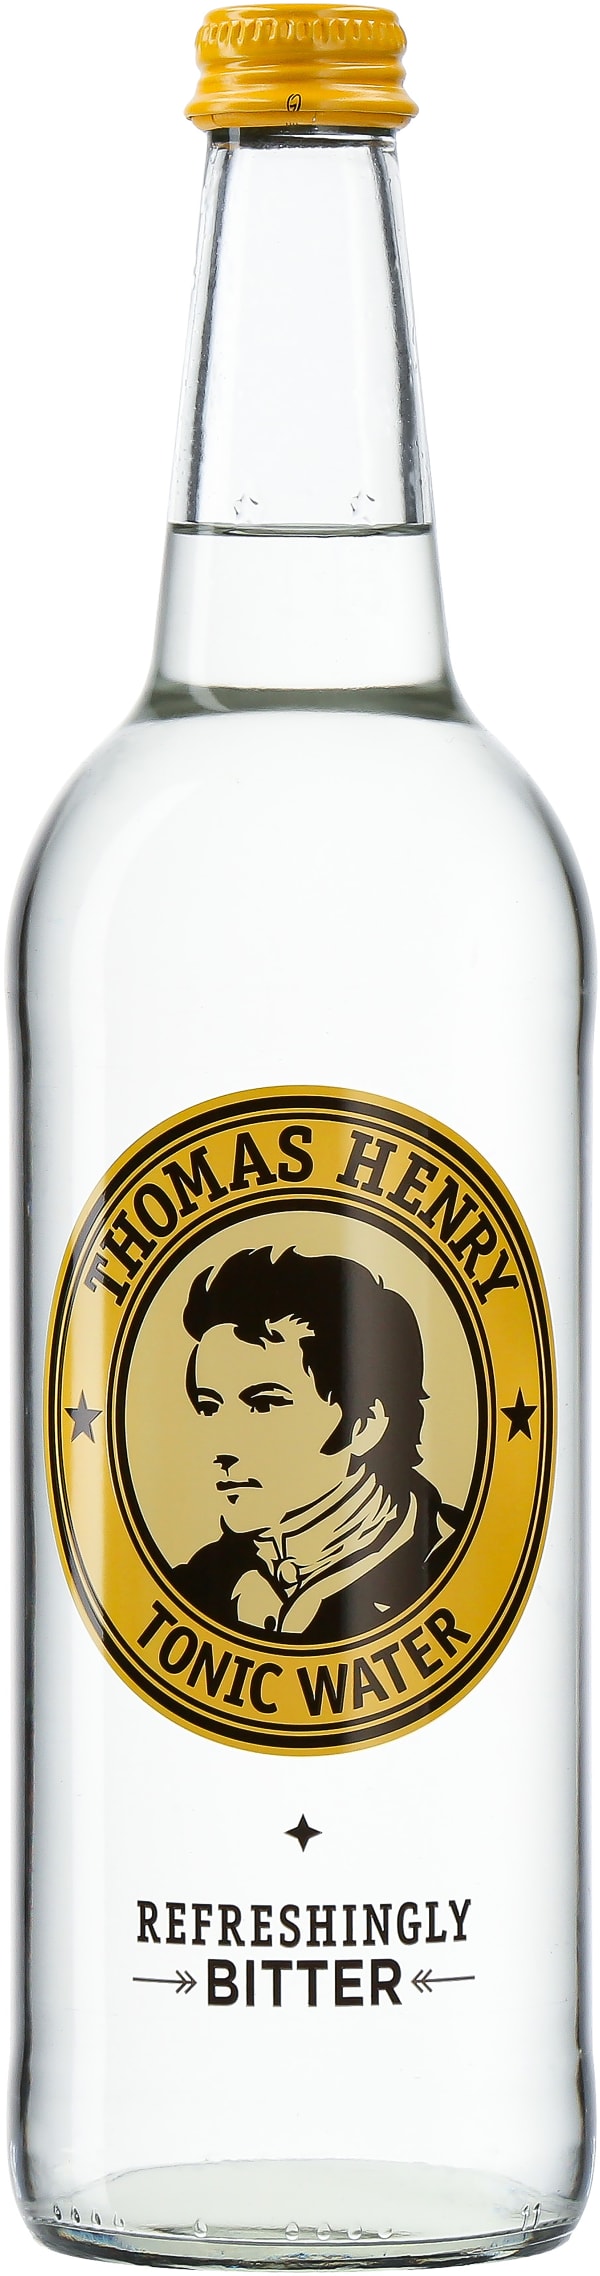 Dry Tonic by Thomas Henry